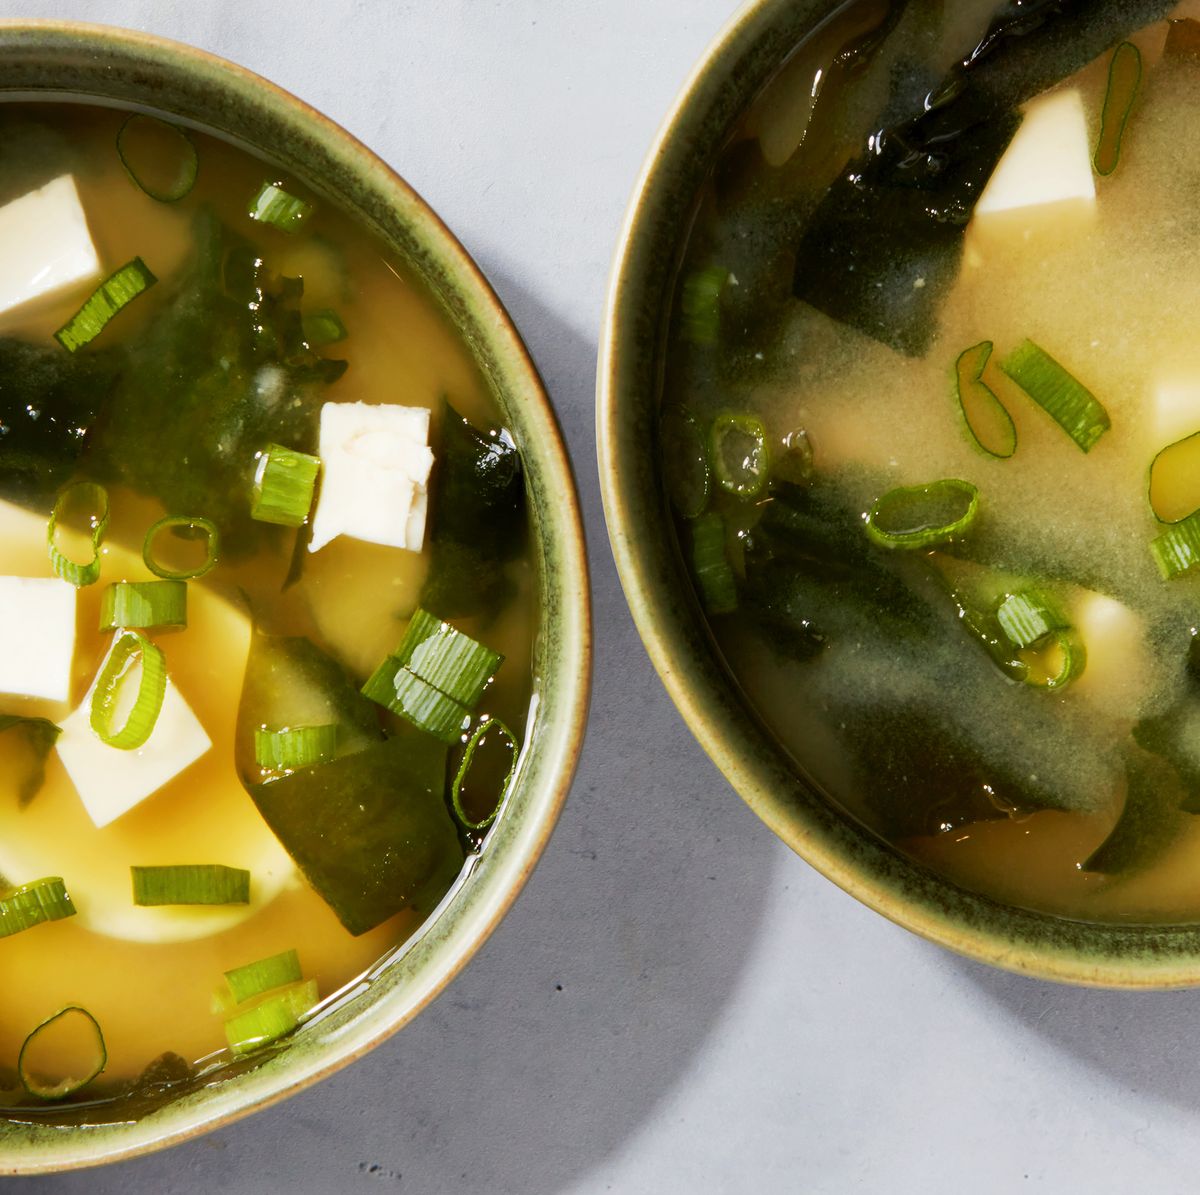 Best Miso Soup Recipe - How To Make Miso Soup